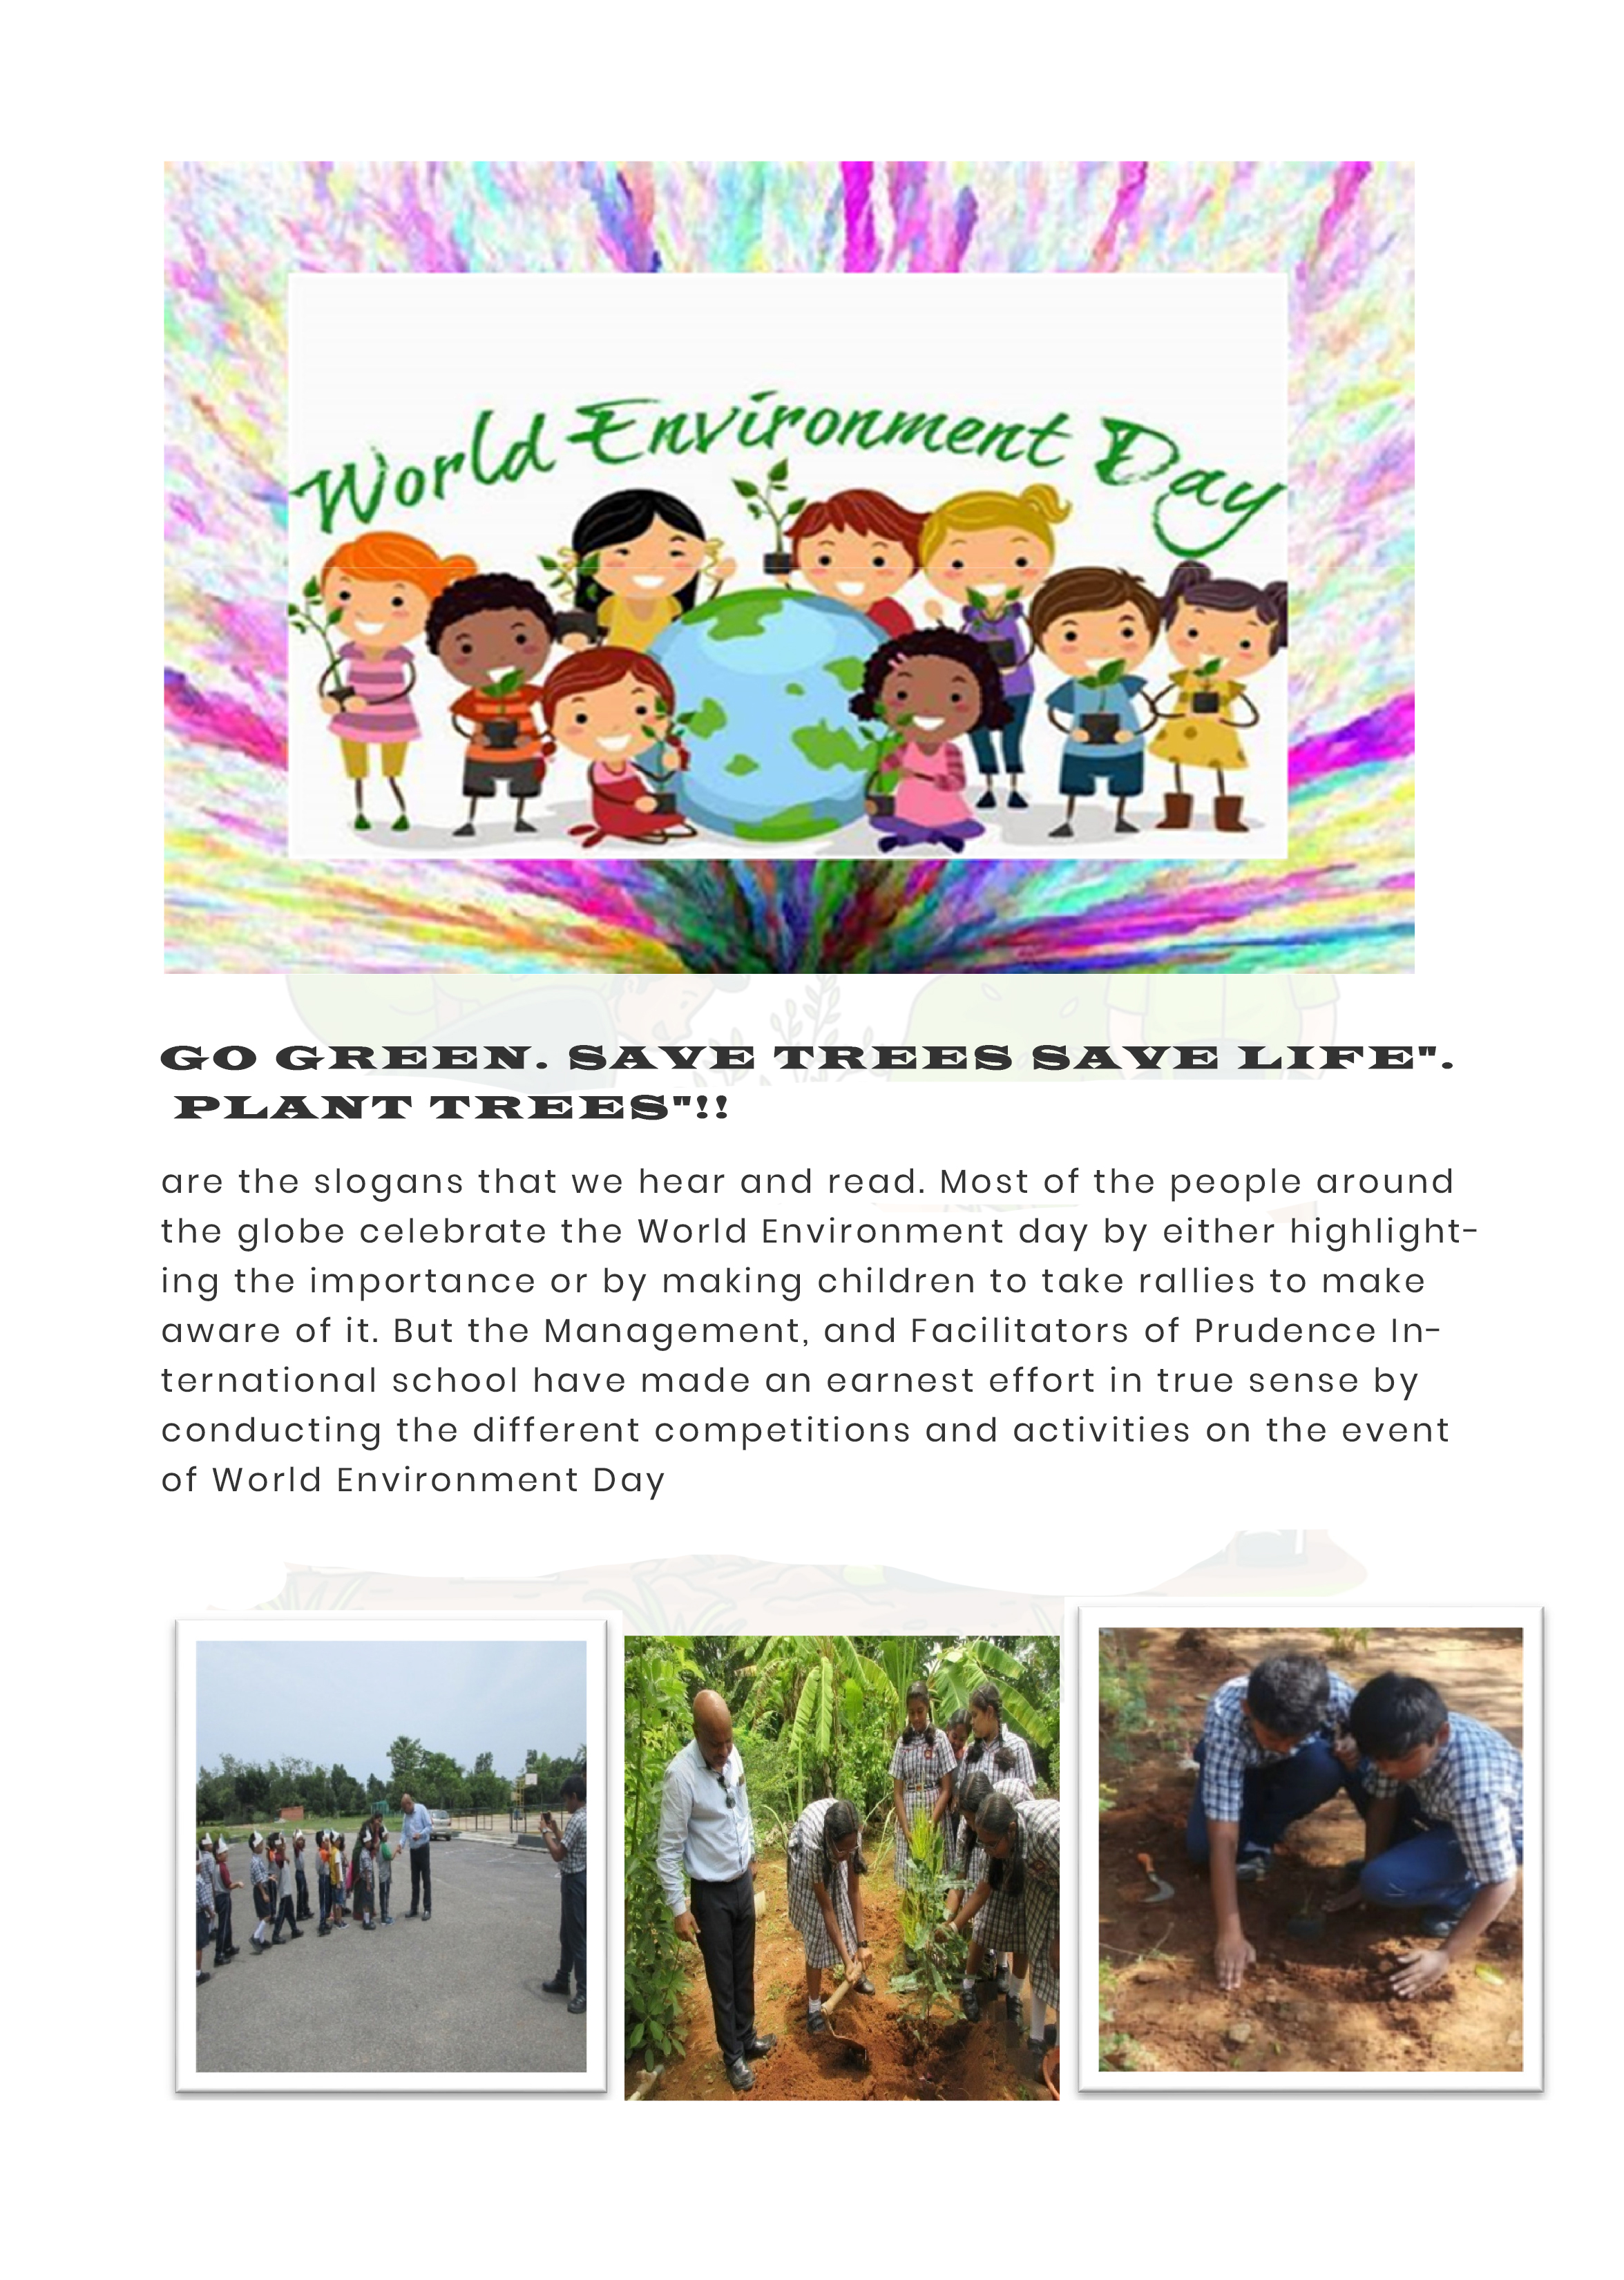 Prudence Environment Day